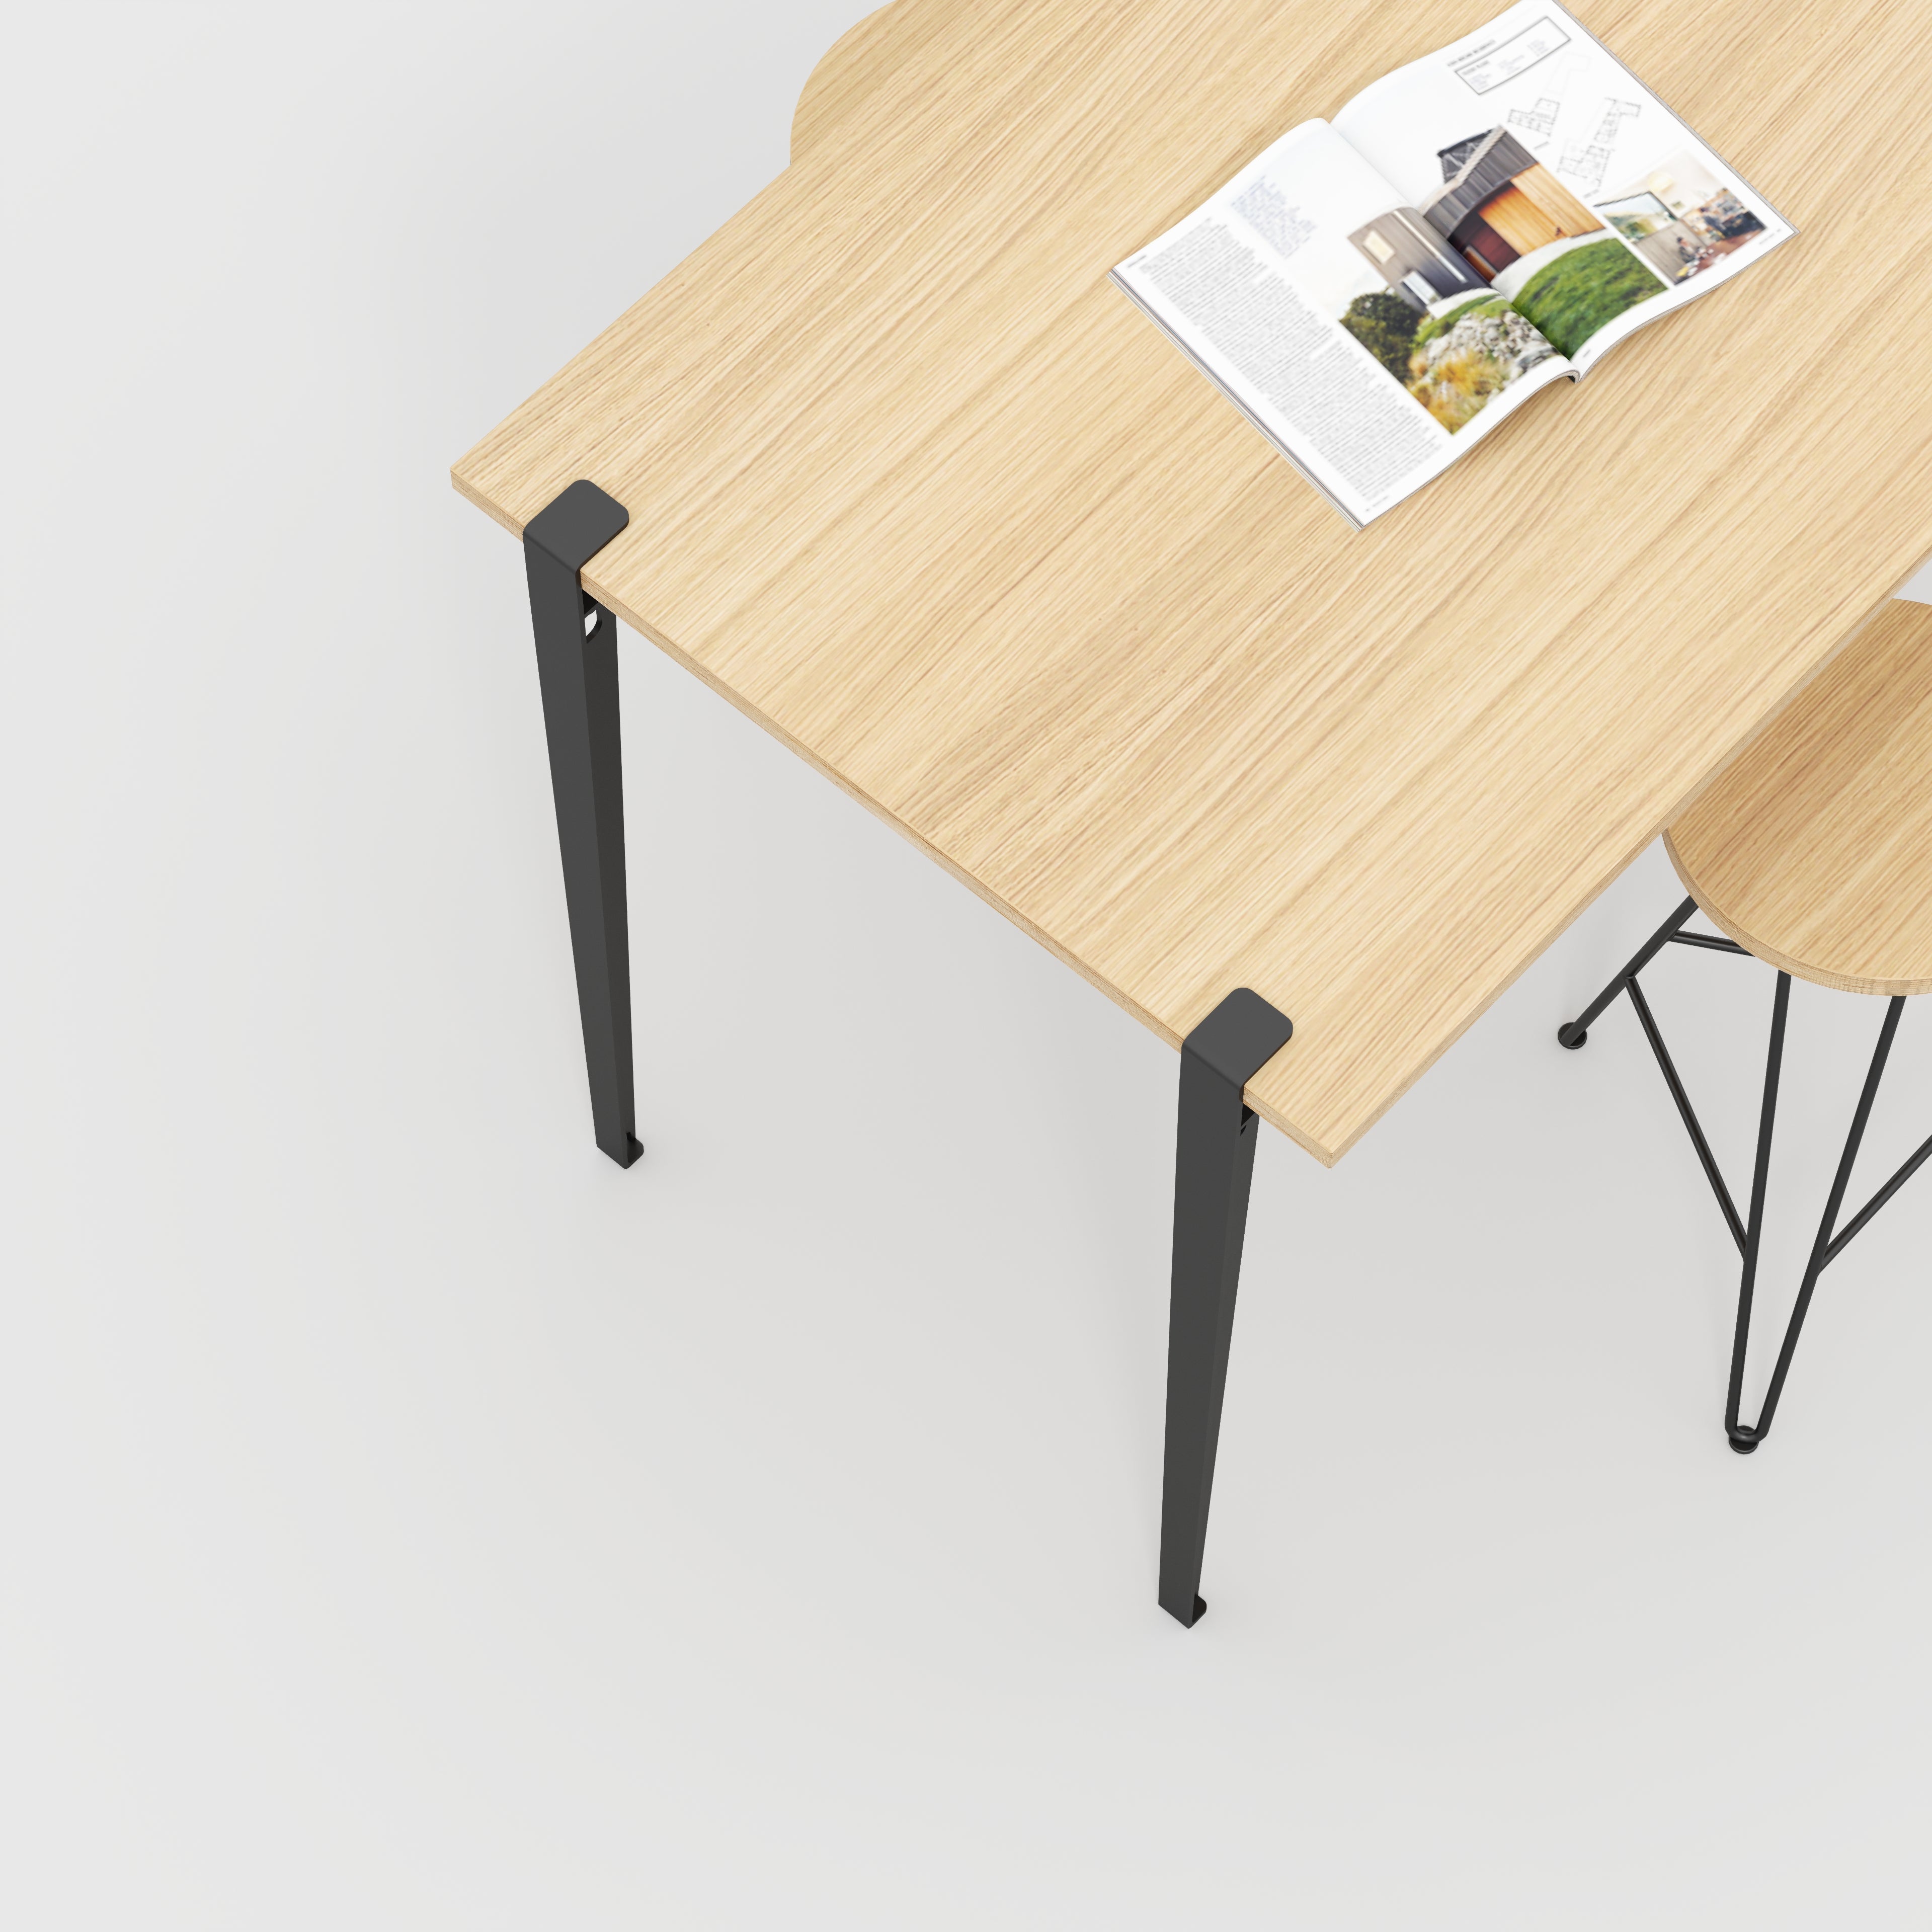 Wall Table with Black Tiptoe Legs and Brackets - Plywood Oak - 1200(w) x 800(d) x 900(h)